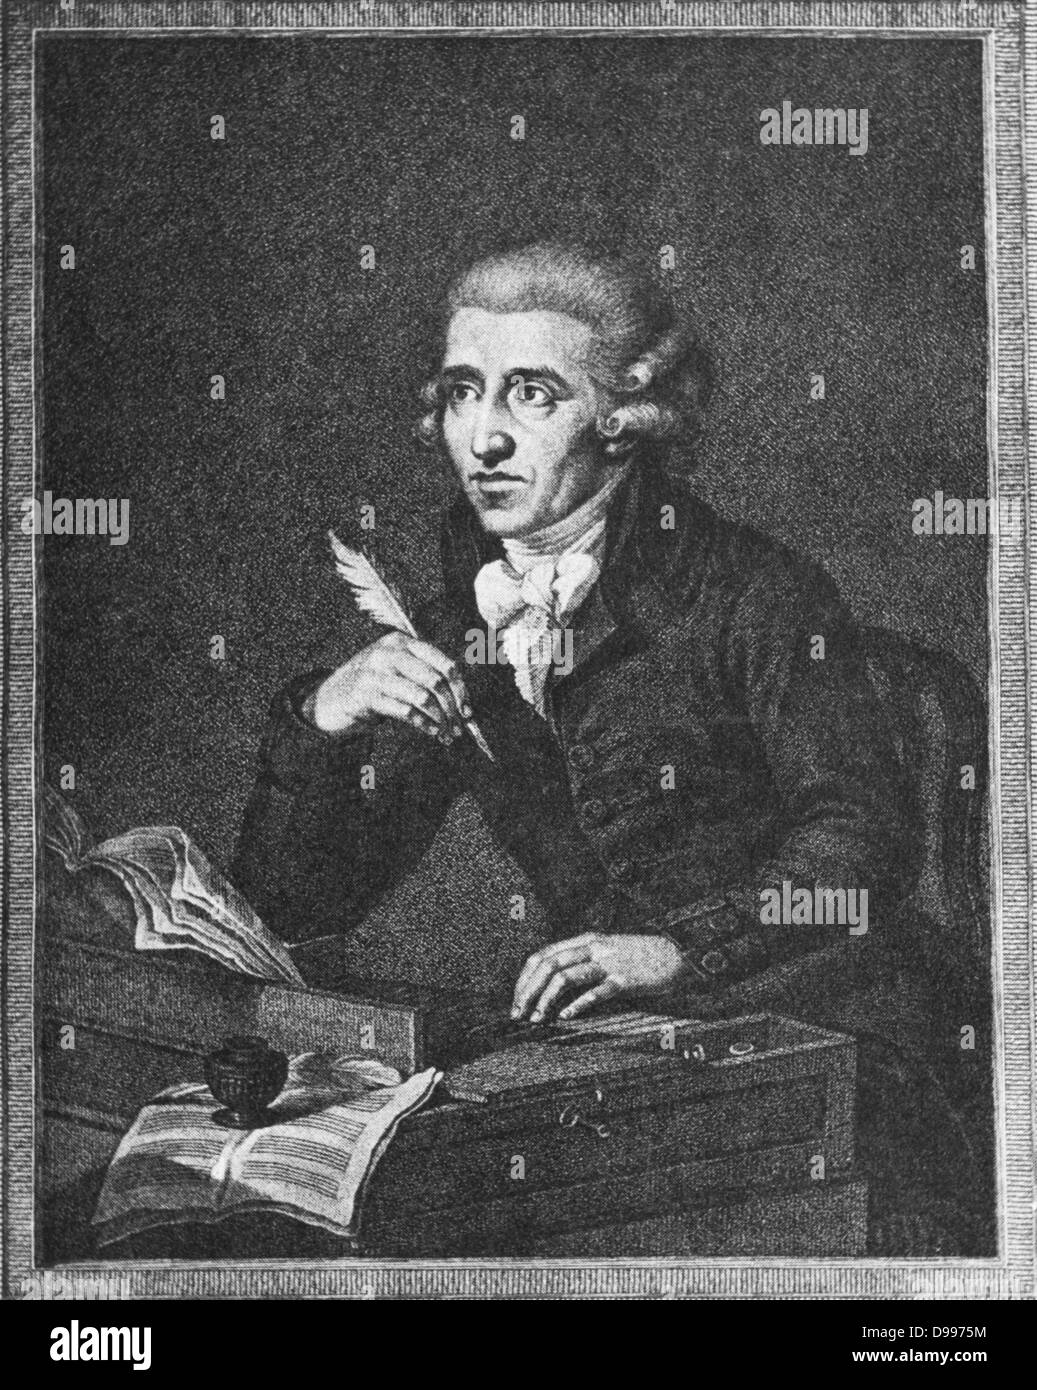 Franz Joseph Haydn 1732 – 1809, known as Joseph Haydn. Austrian composer, one of the most prolific and prominent composers of the classical period. Stock Photo